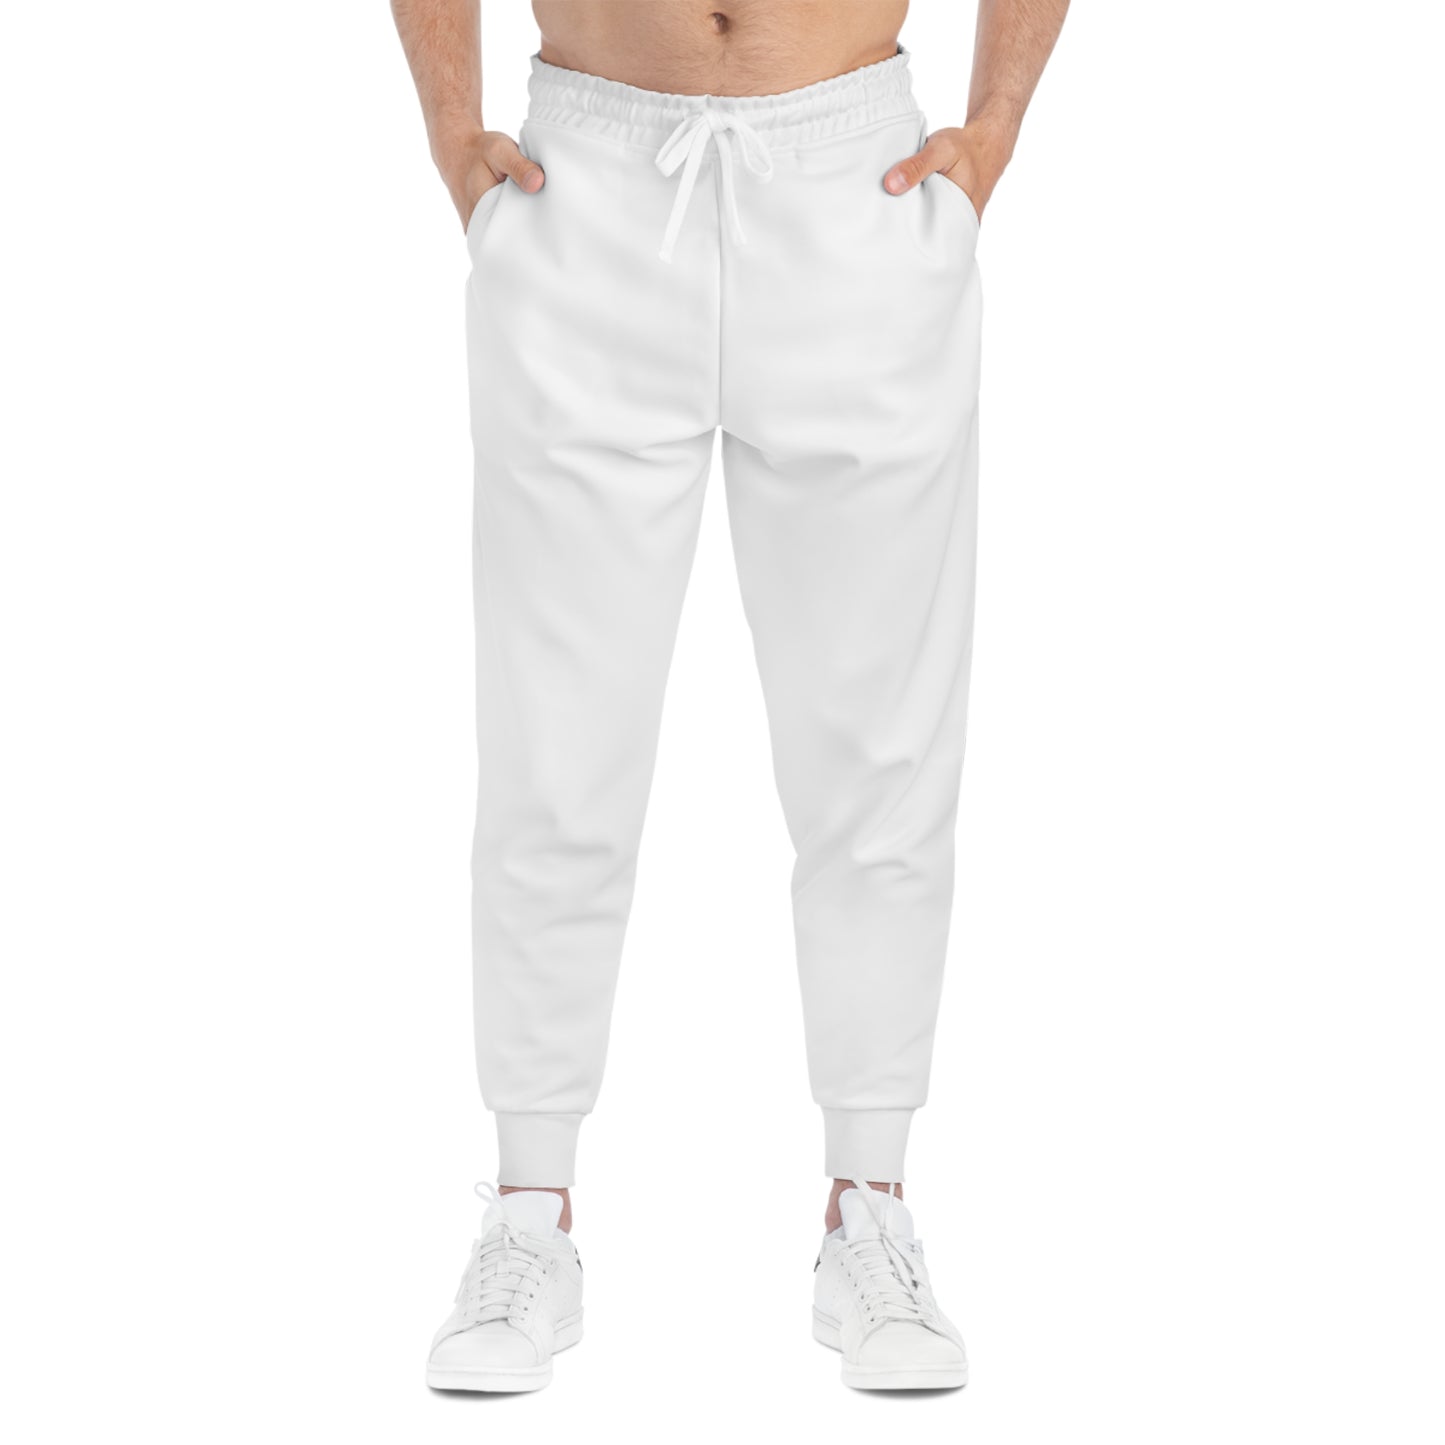 Back that Thing Up Camping In Comfort Athletic Joggers (AOP)